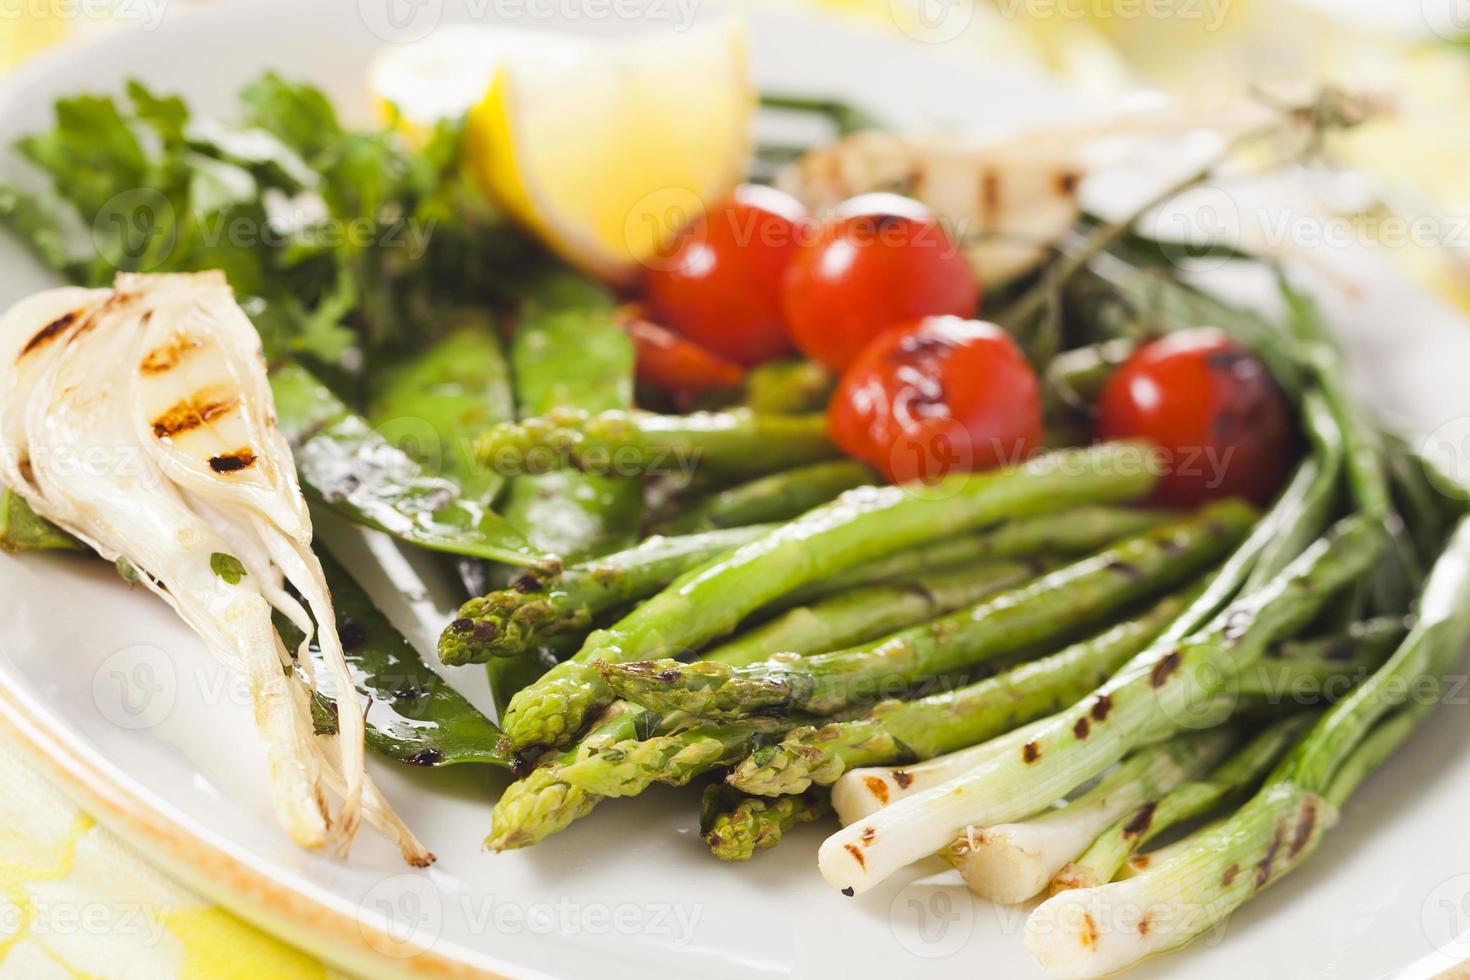 marinated grilled vegetables - asparagus, onions, peas, tomatoes photo